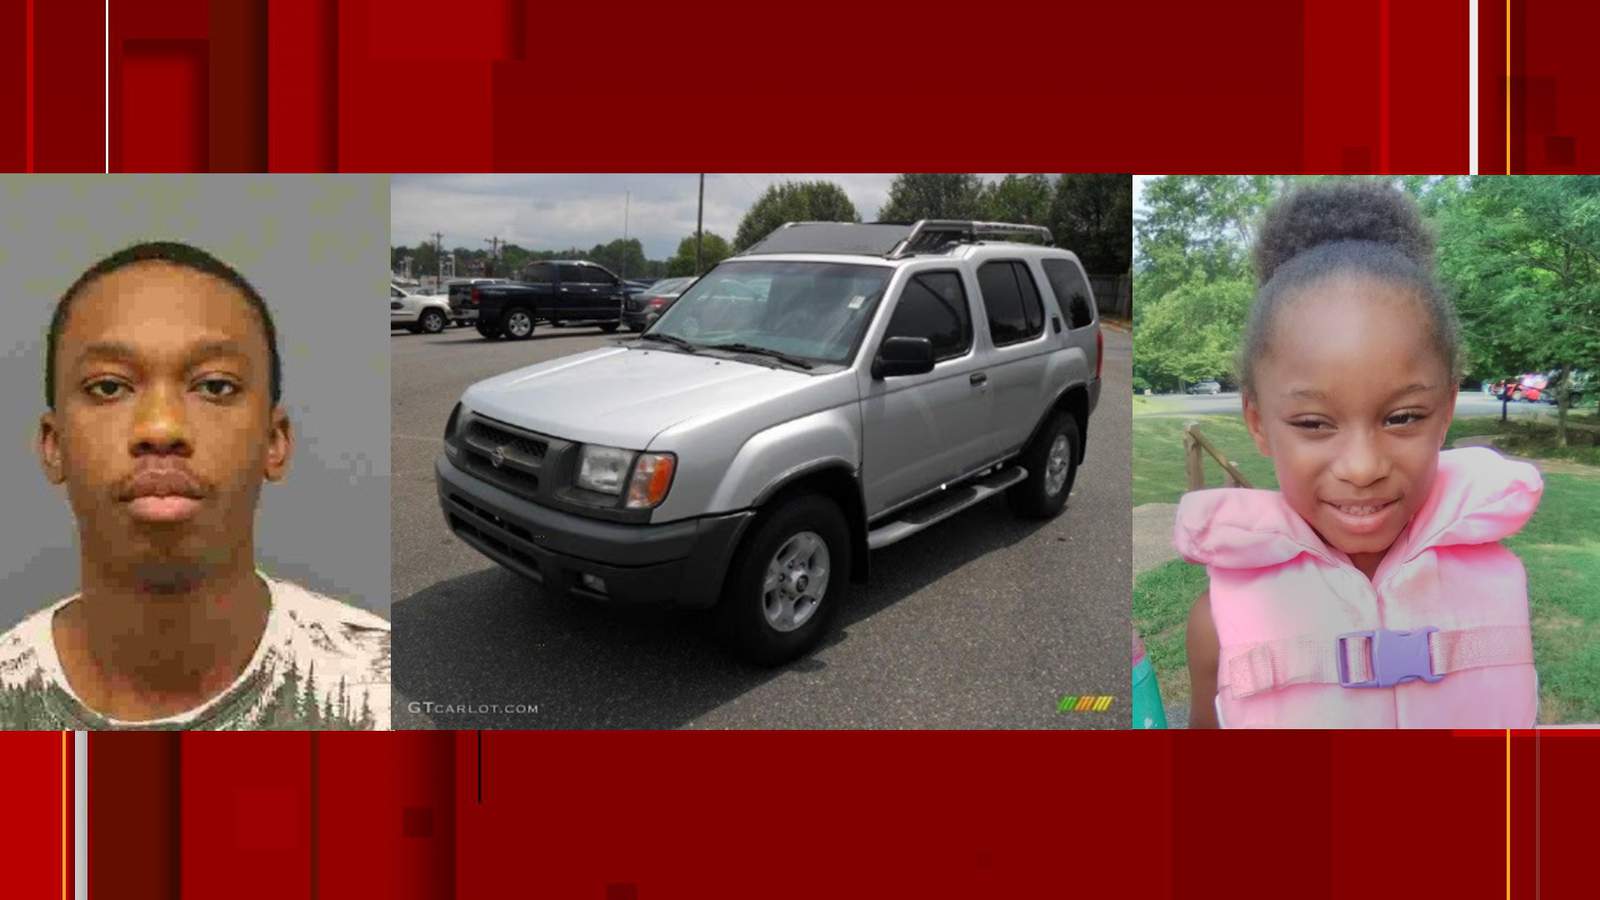 Amber Alert canceled, Newport News 4-year-old safely located